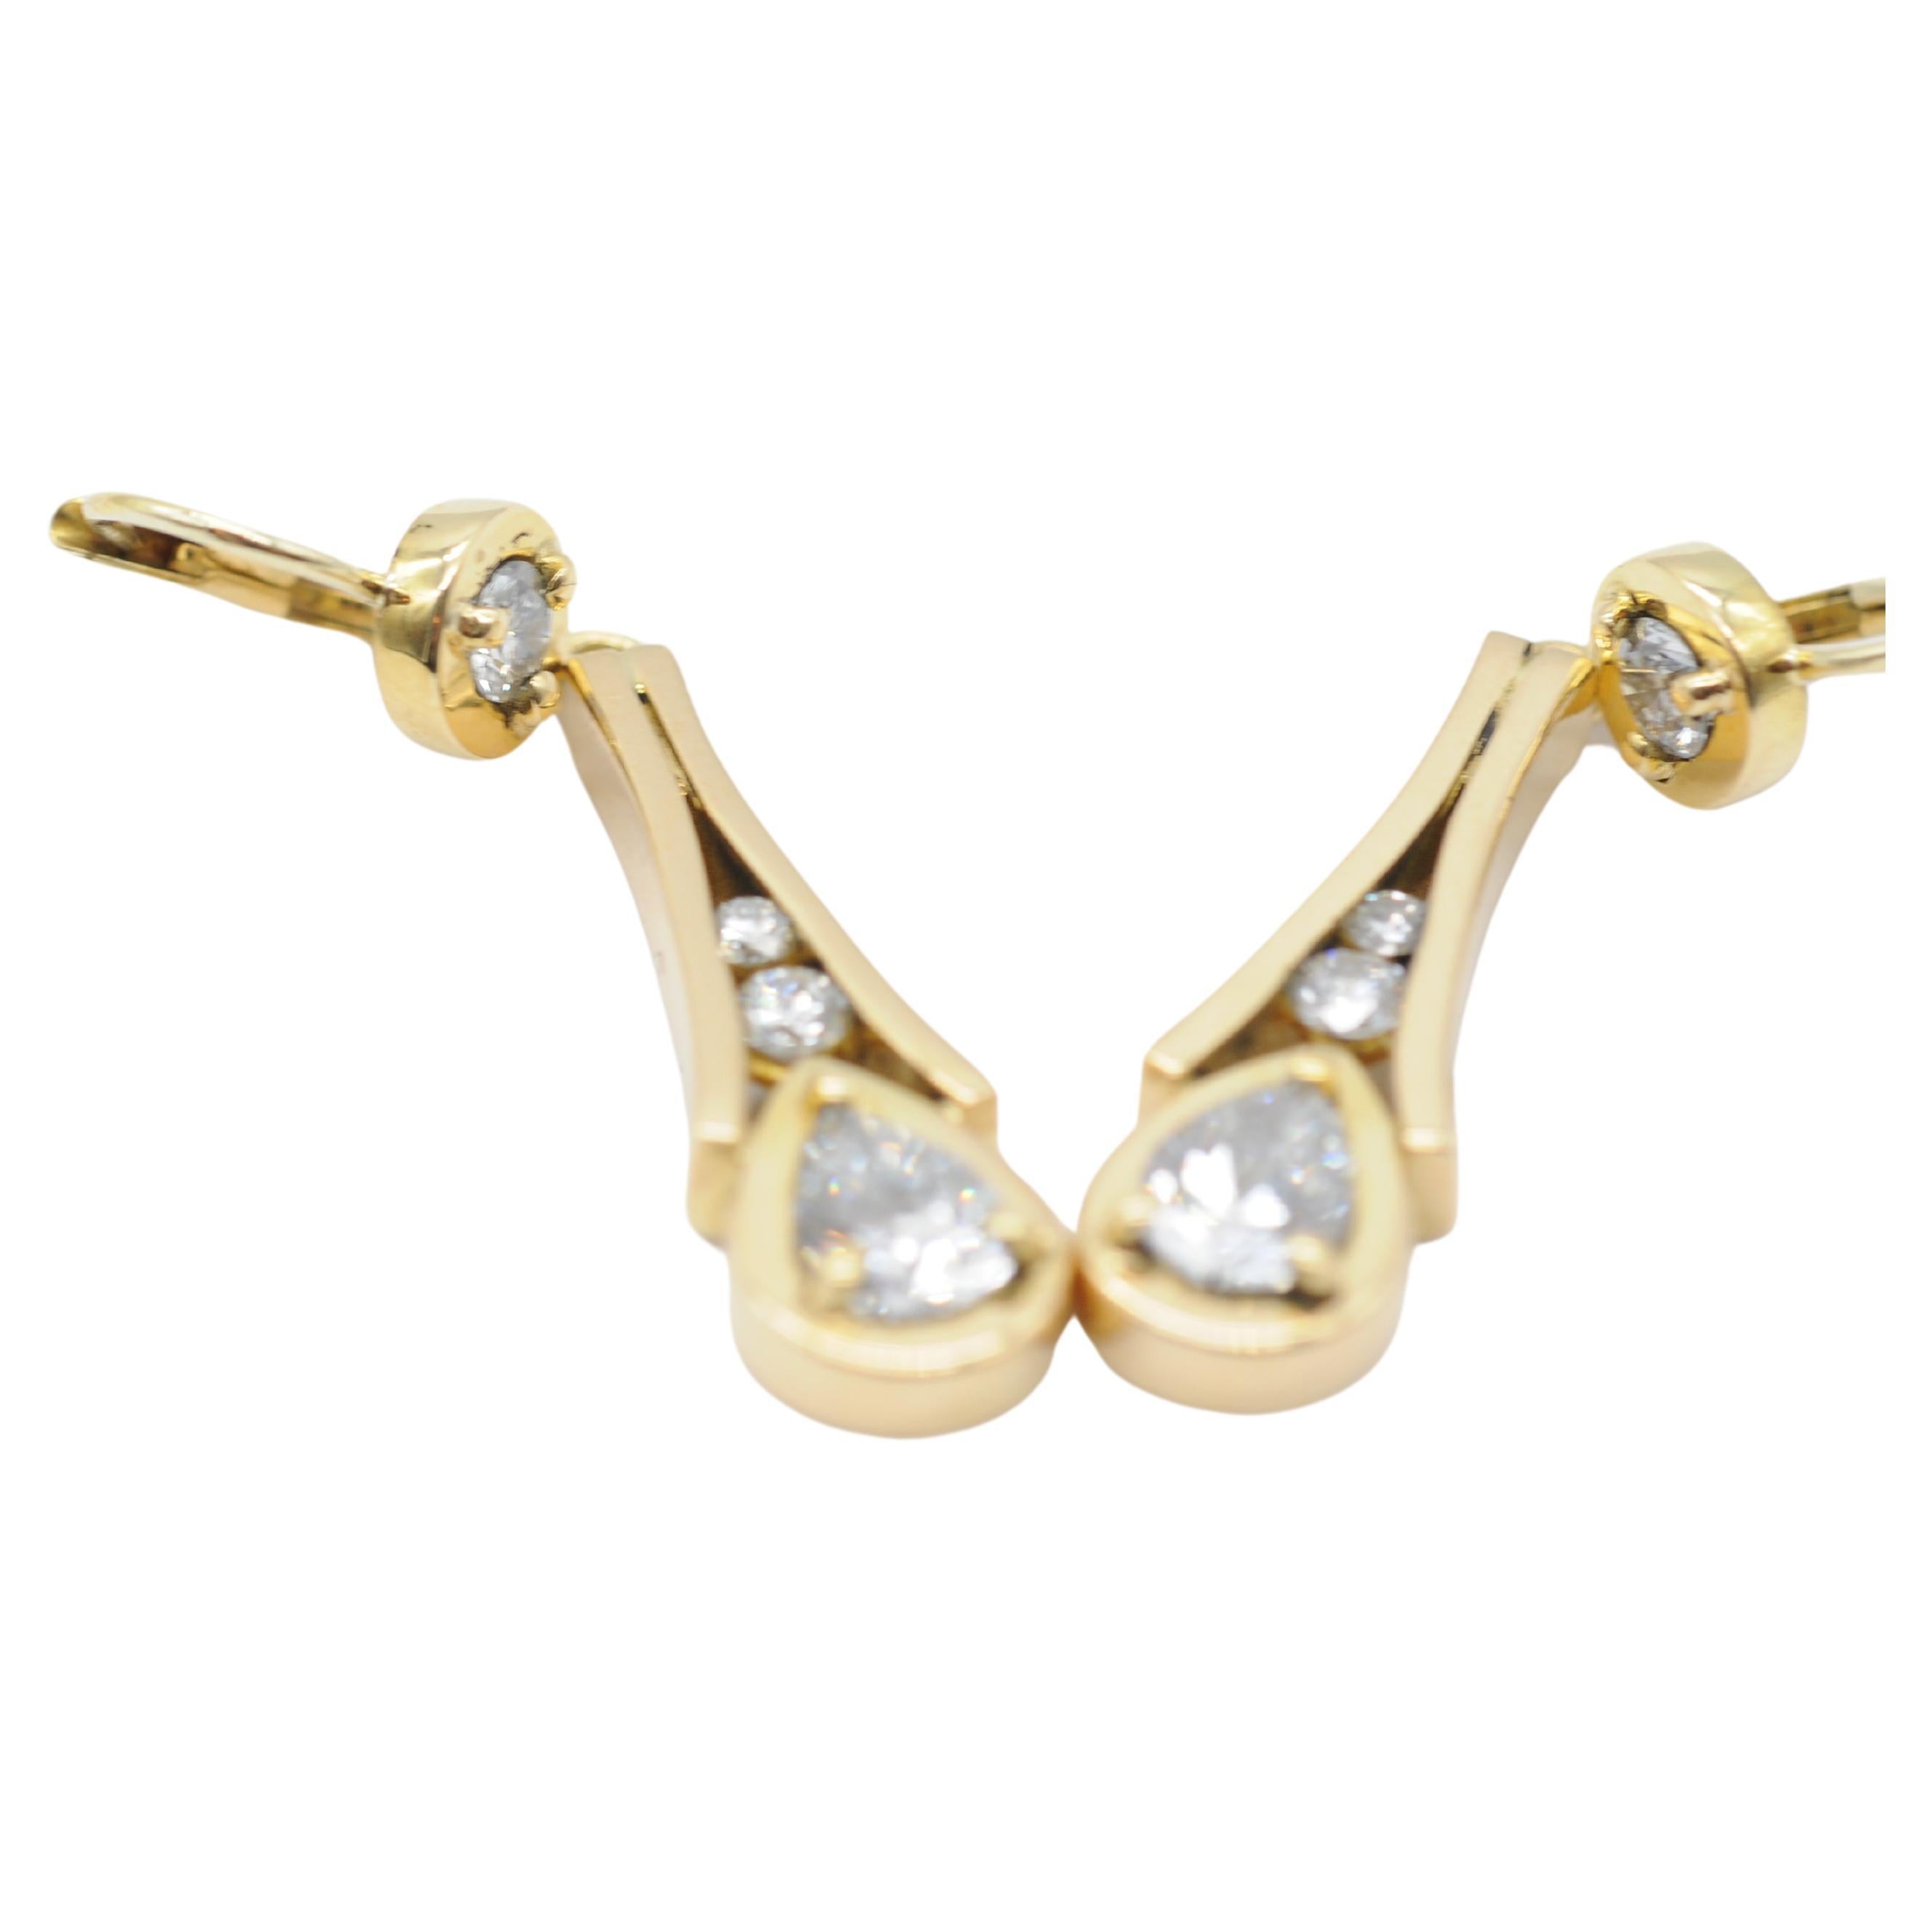 Aesthetic Movement Noble Earrings with pear cut diamond in 18 yellow gold For Sale